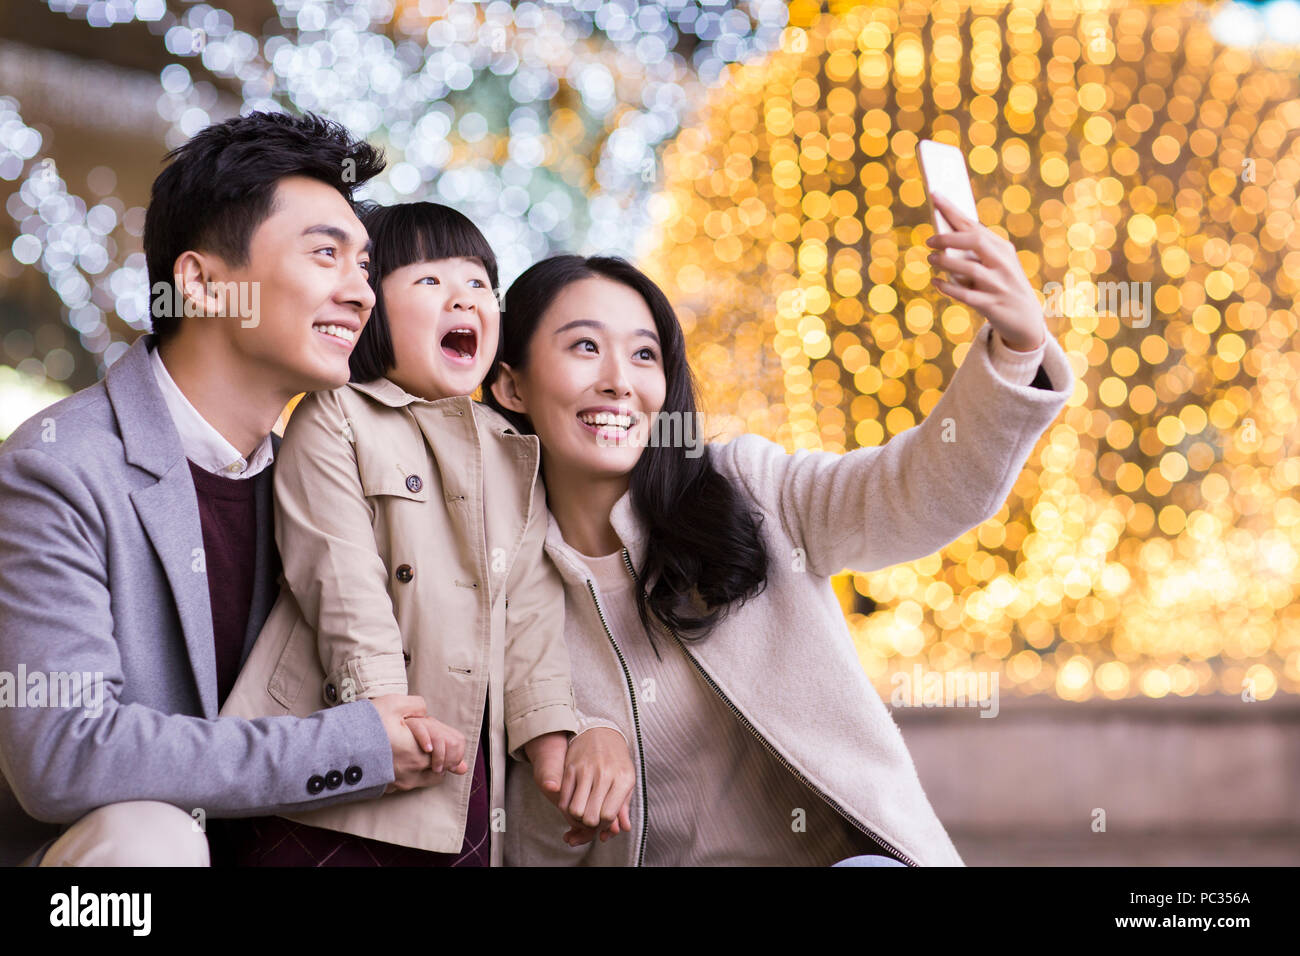 Cheerful young Chinese family taking self portrait with smart phone Banque D'Images